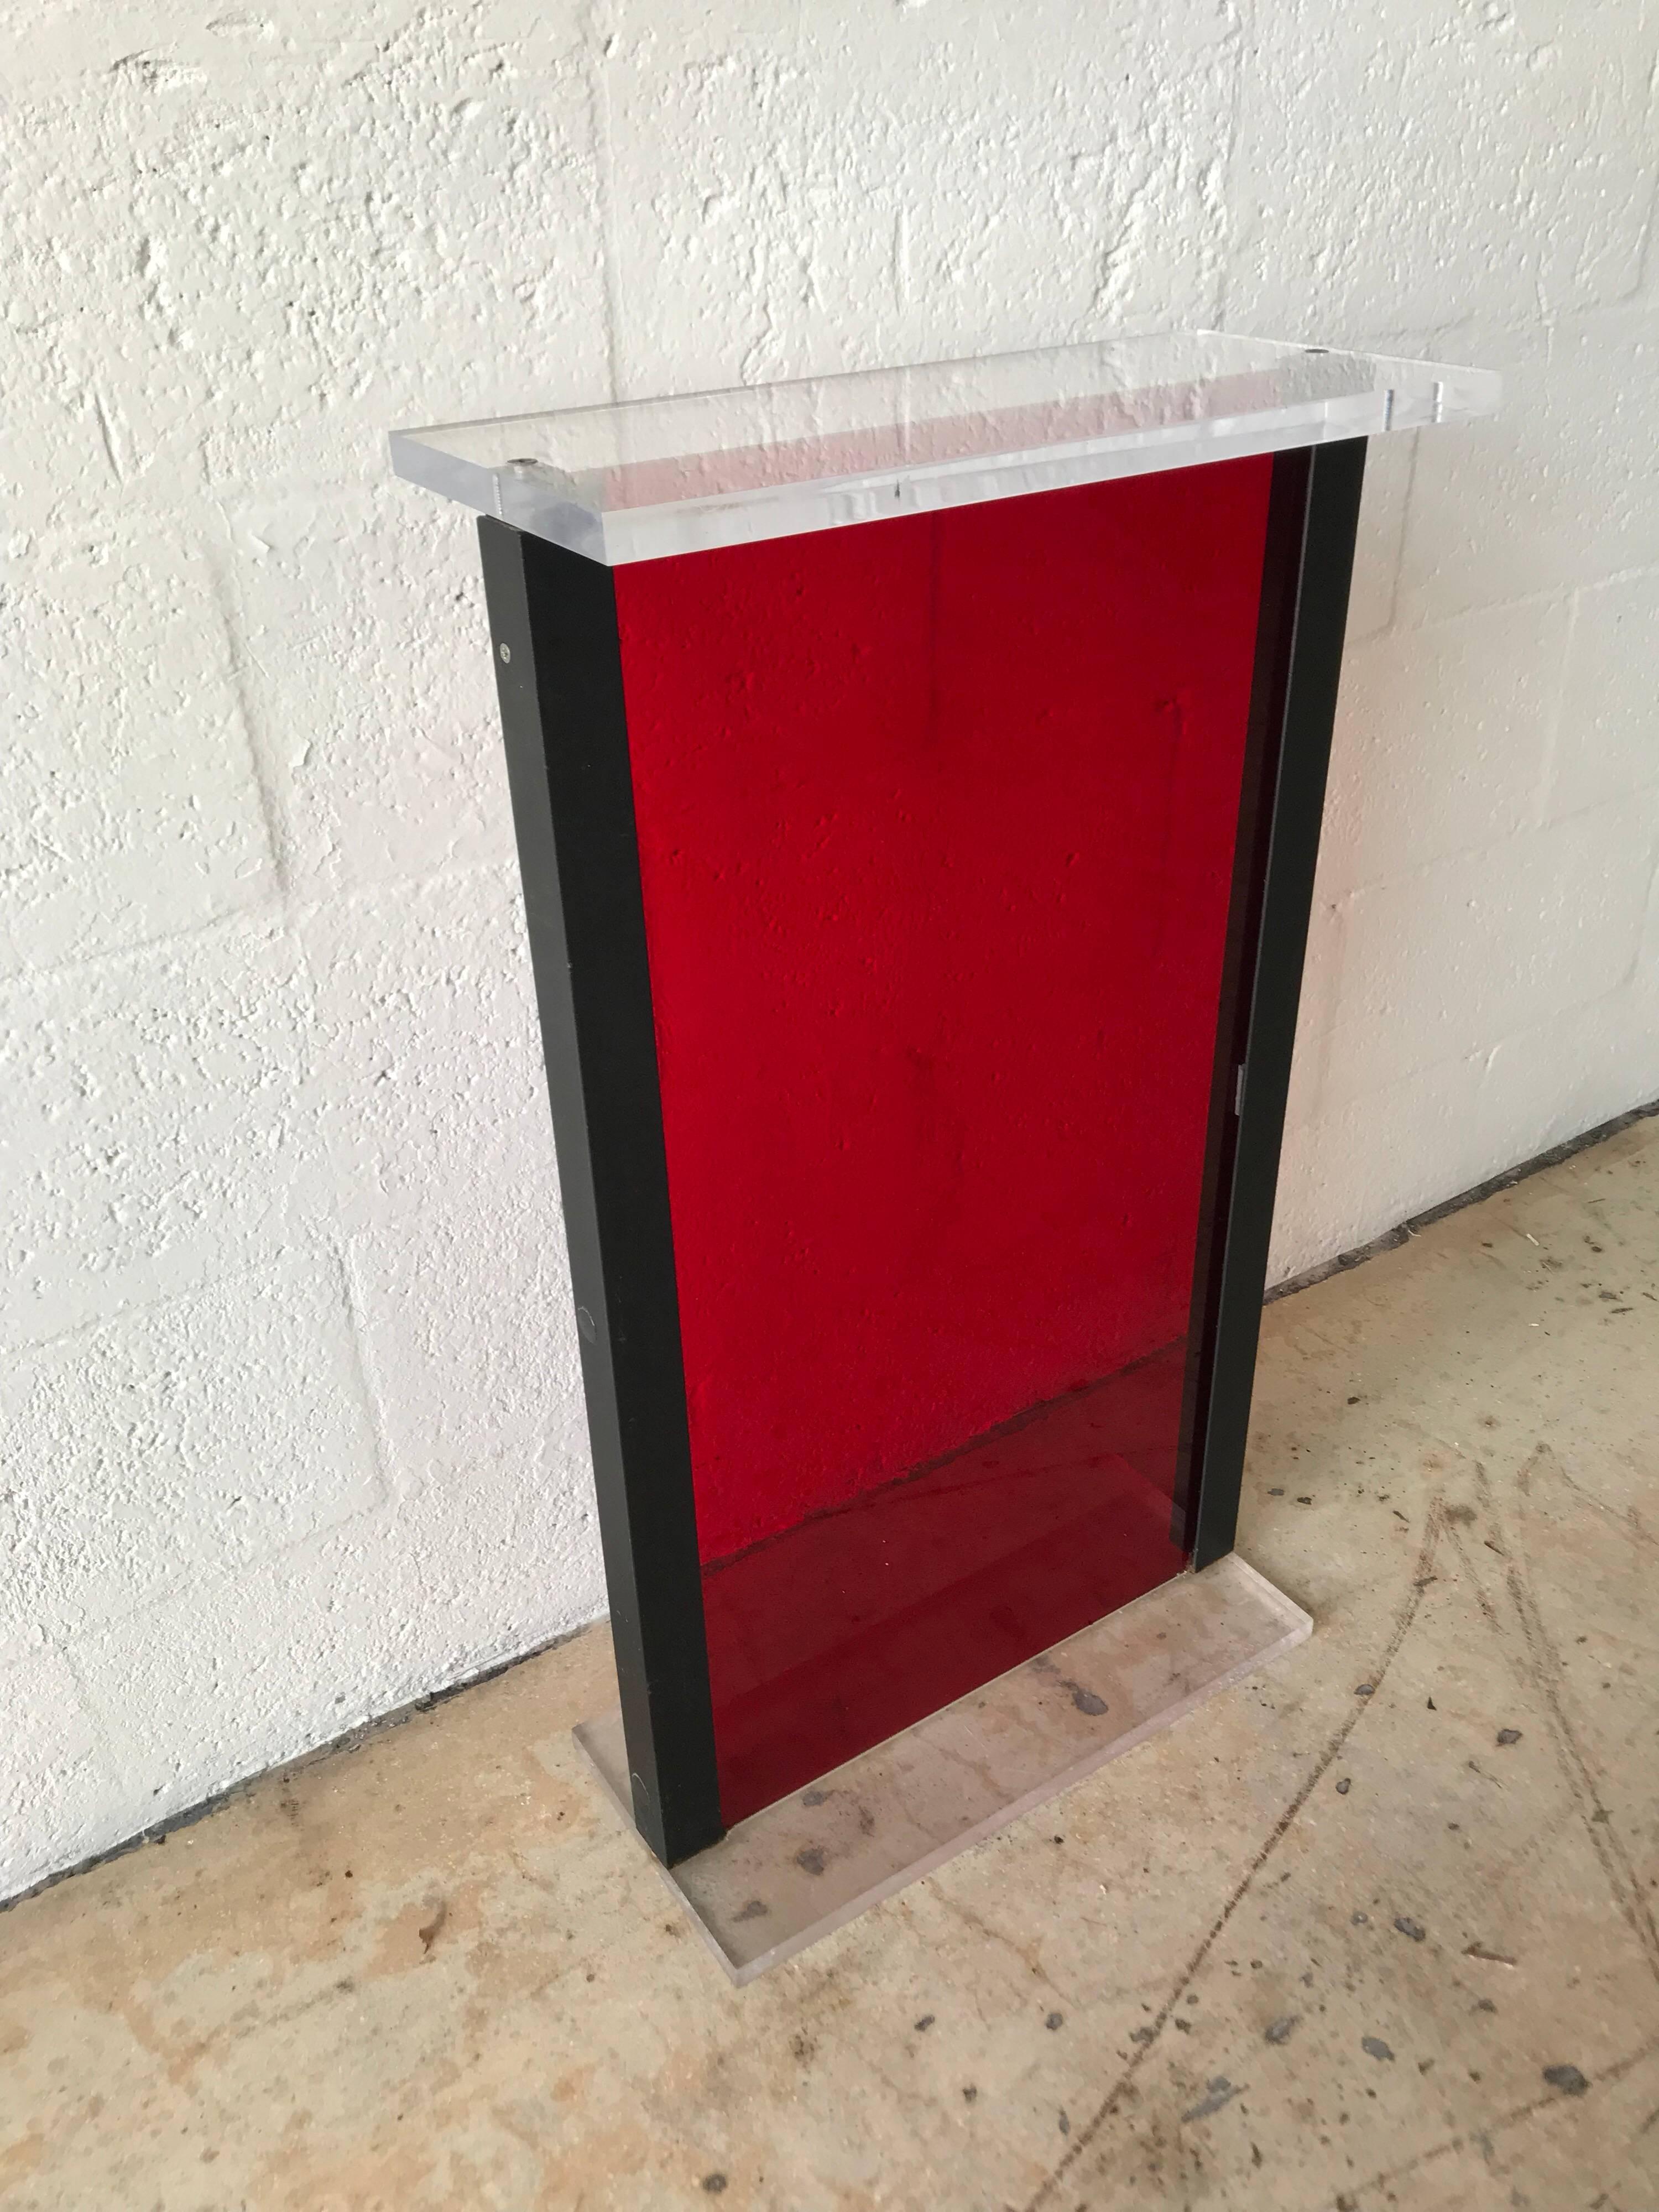 Postmodern display pedestal rendered in red and clear Lucite with a black steel frame, from the original Versace store in Miami Beach